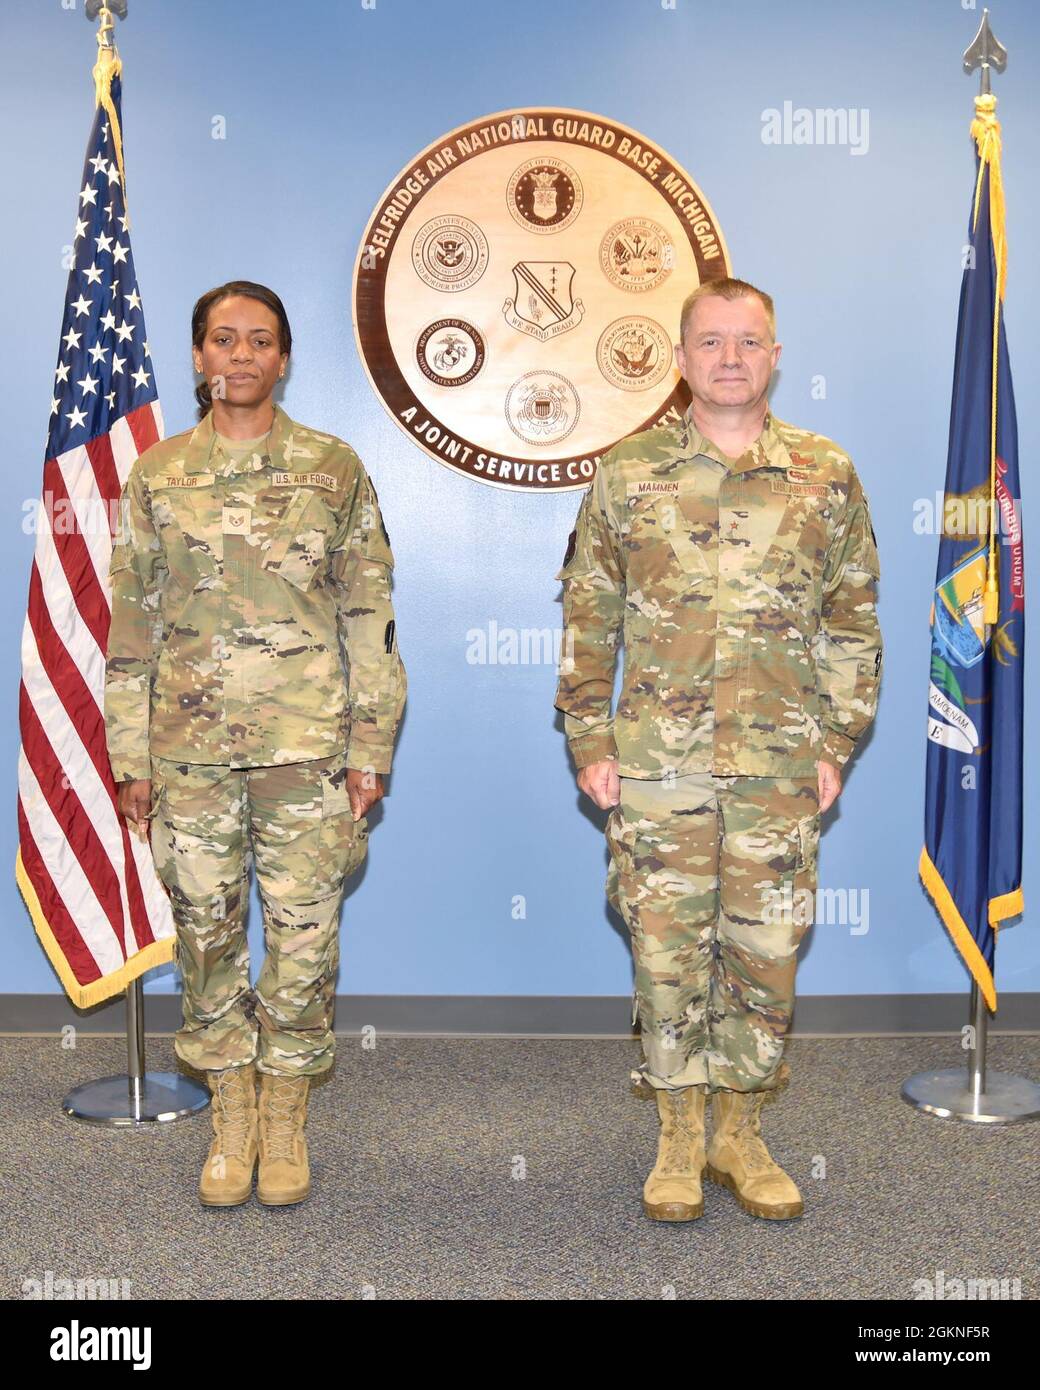 SELFRIDGE AIR NATIONAL GUARD, Mich.-- Tech. Sgt. Samara Taylor, a public affairs specialist with the 127th Wing Public Affairs office here, and Brig. Gen. Rolf E. Mammen, commander 127th Wing, stand at attention in advance of Taylor's promotion to the rank of technical sergeant here on June 5, 2021. Stock Photo